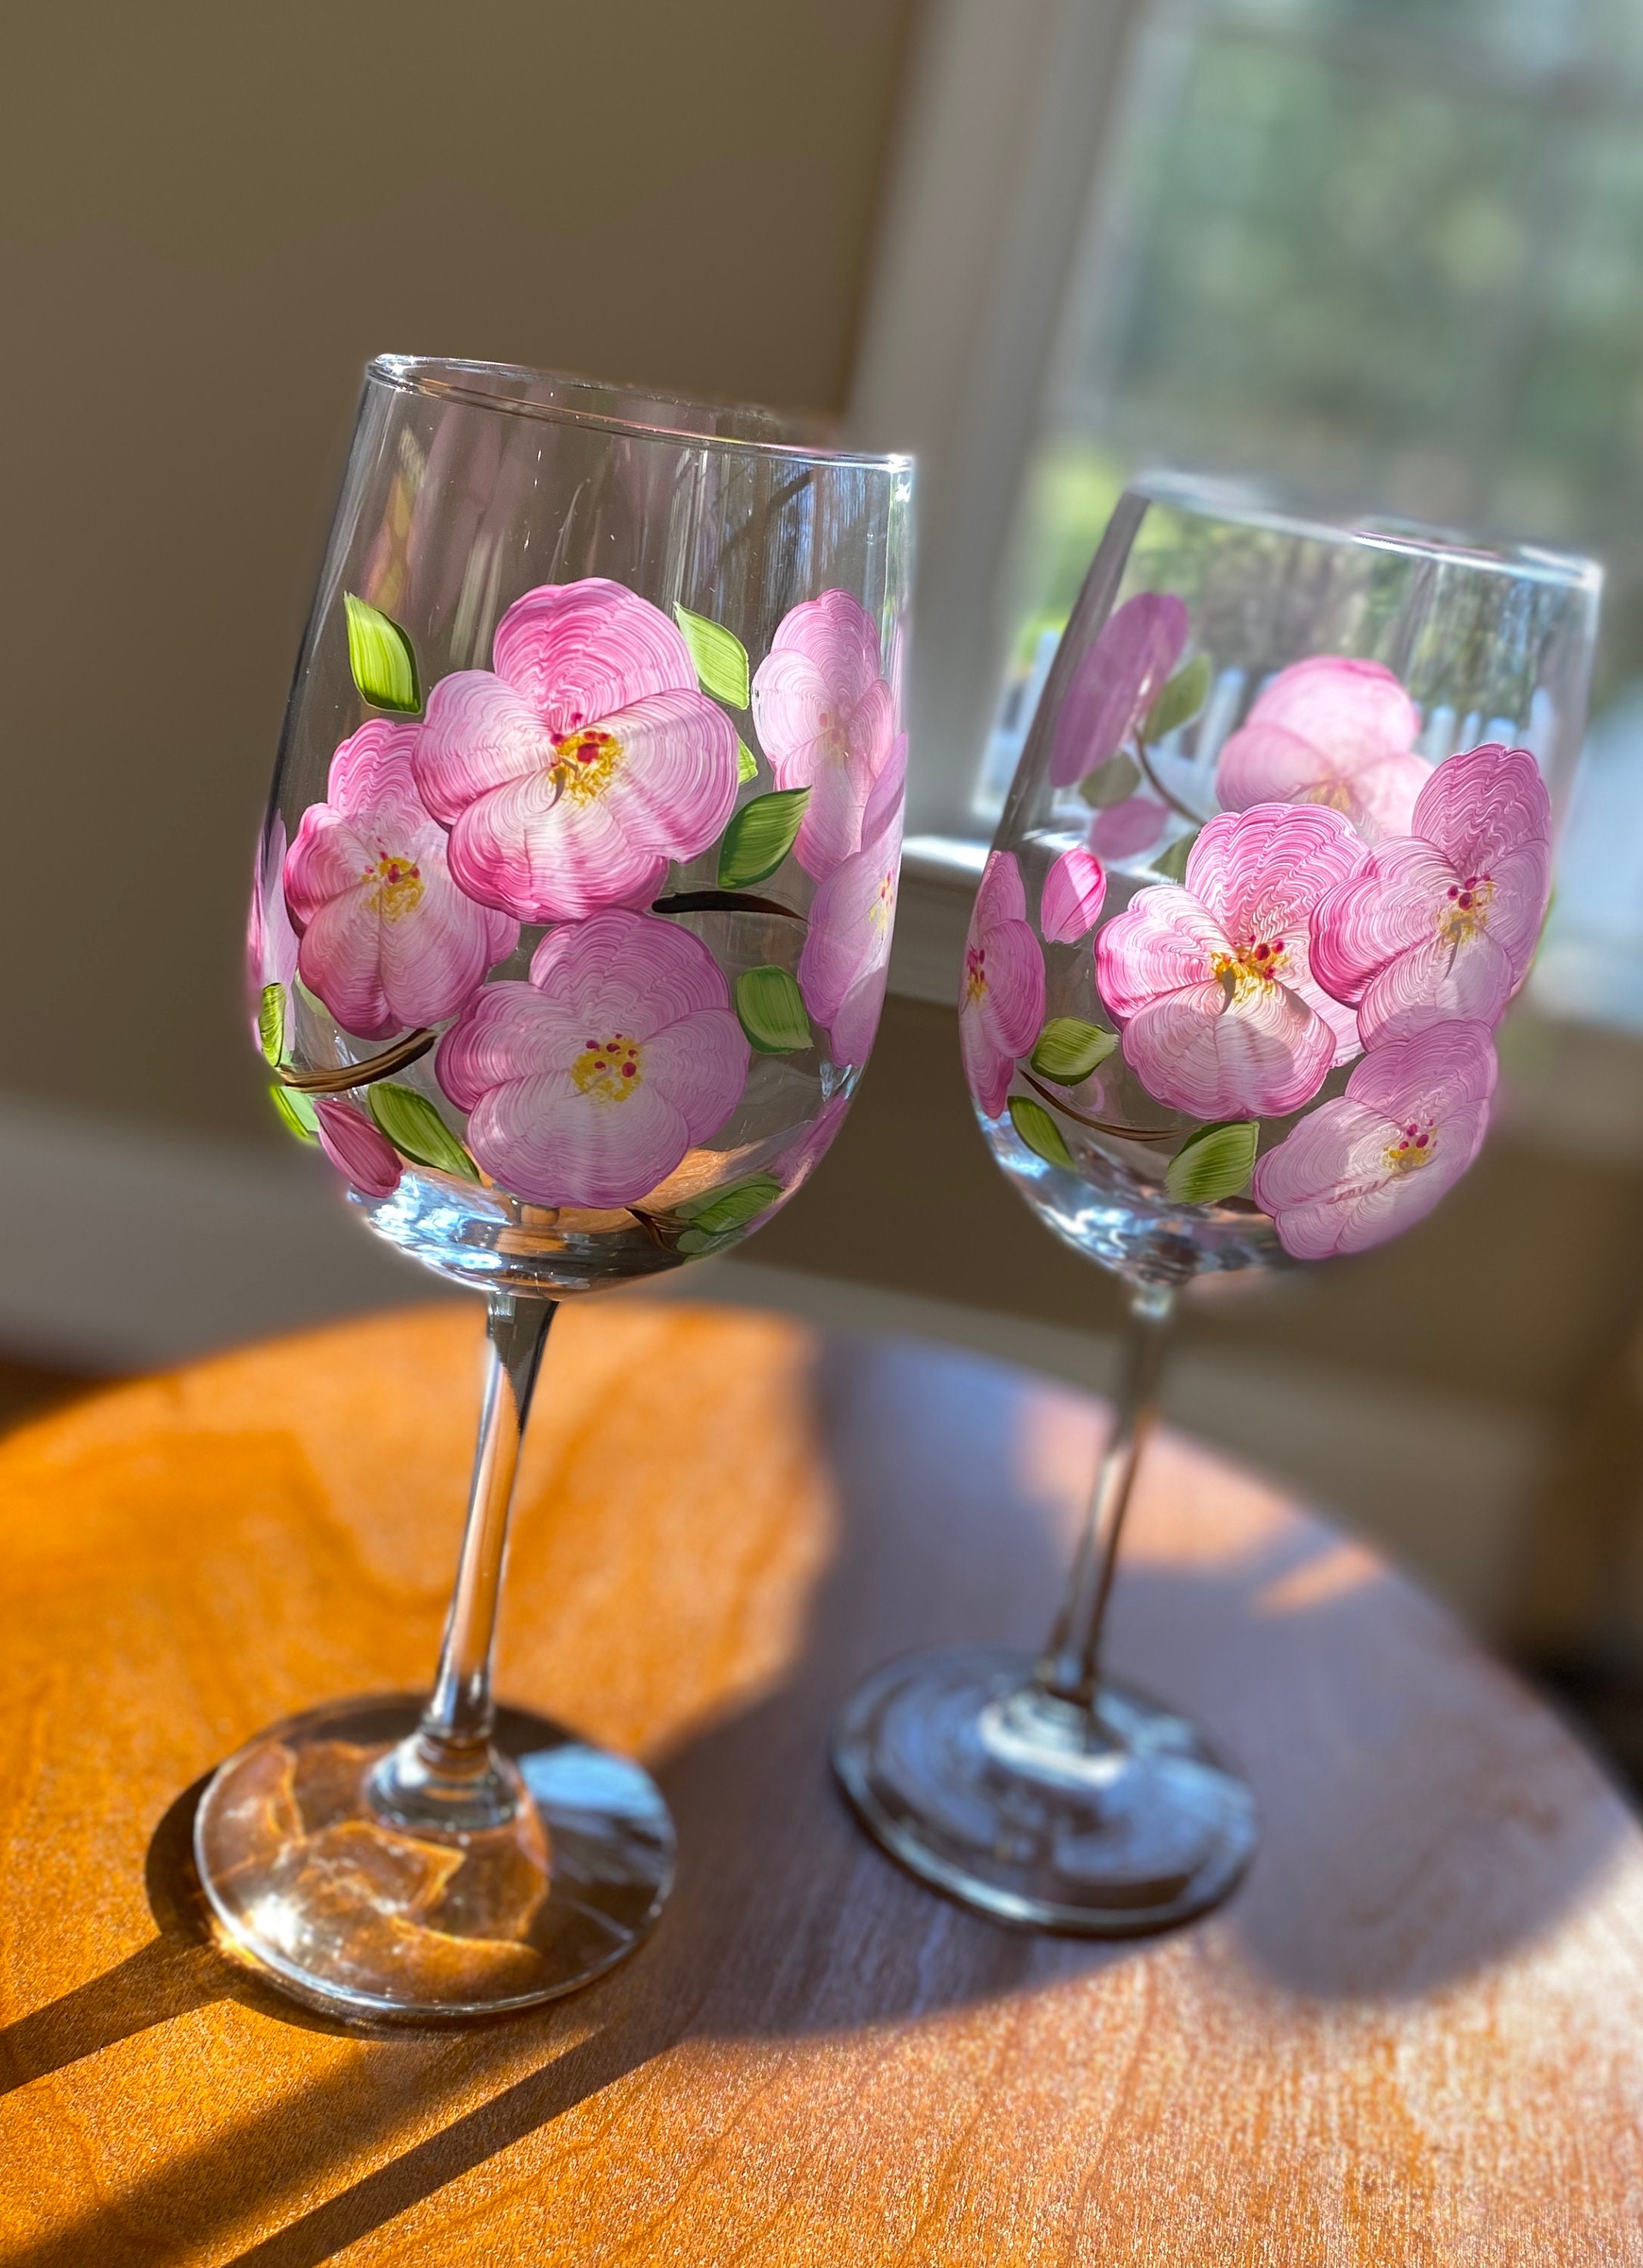 Discover Elegance: Tulipan Petal Wine Glasses in Stunning Pink and Green